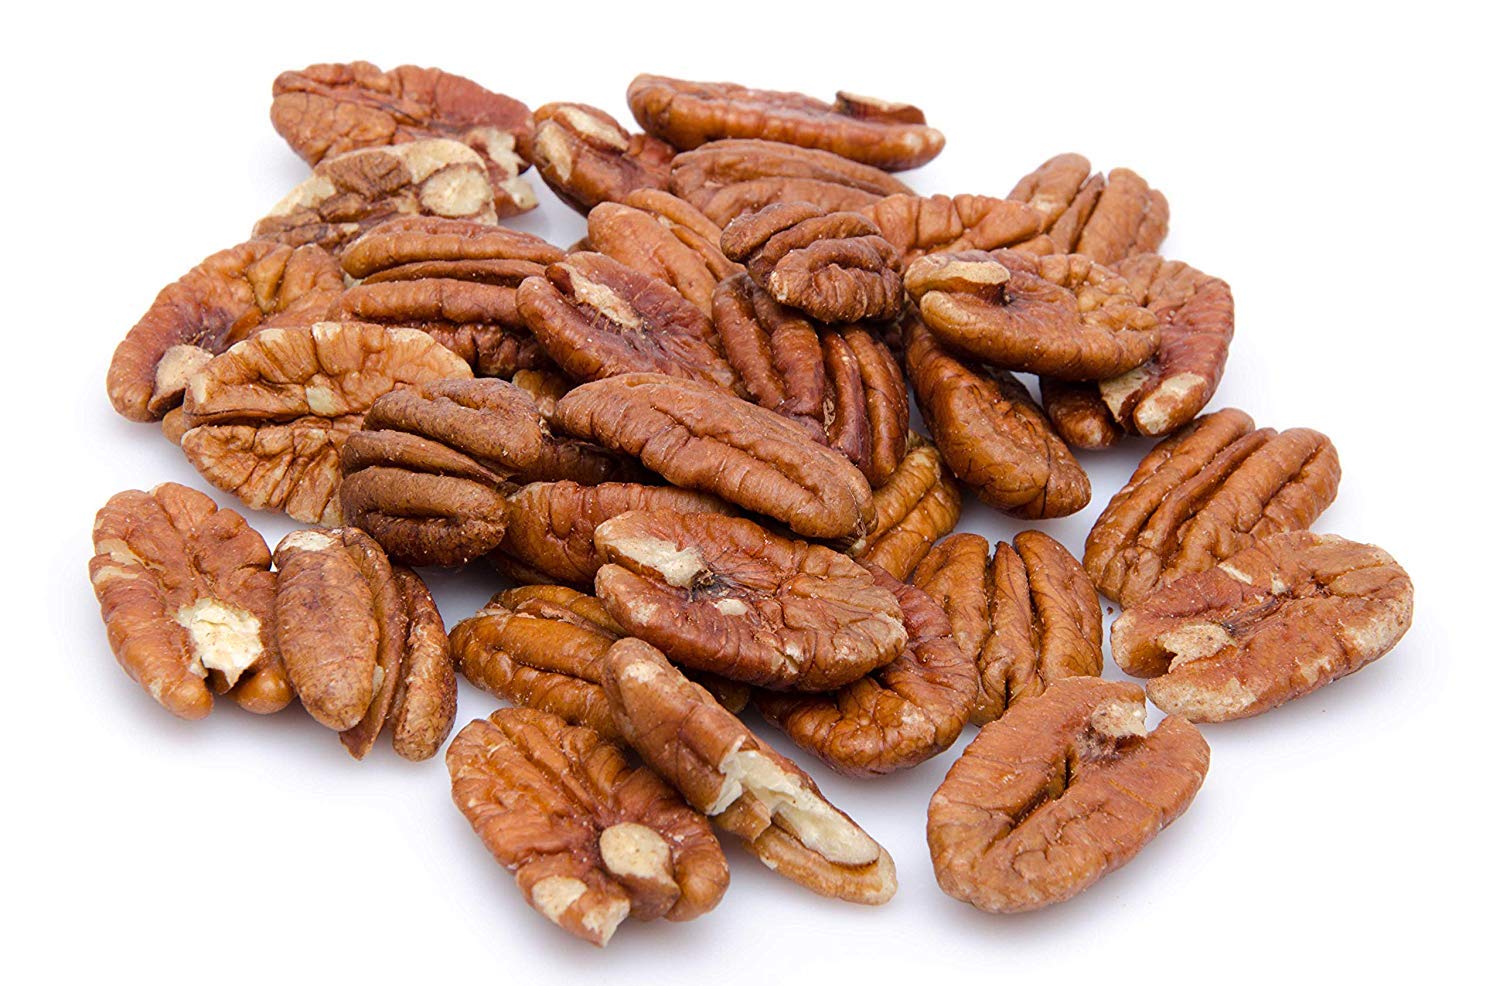 How many calories are in Wendy's Pecans?